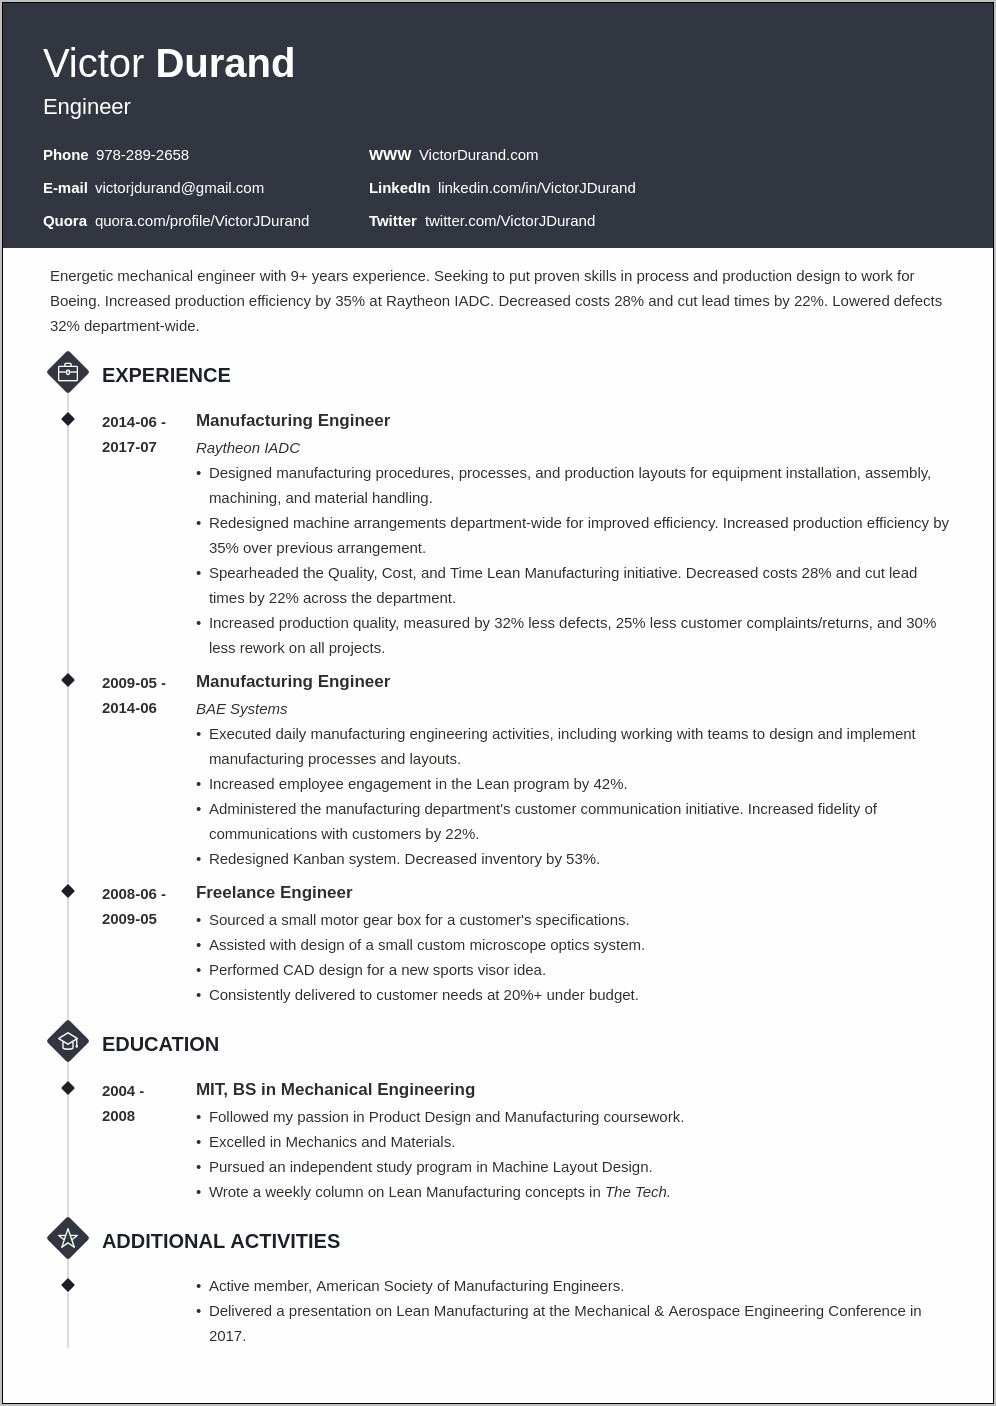 Graduated 9 Years Ago Experience Resume